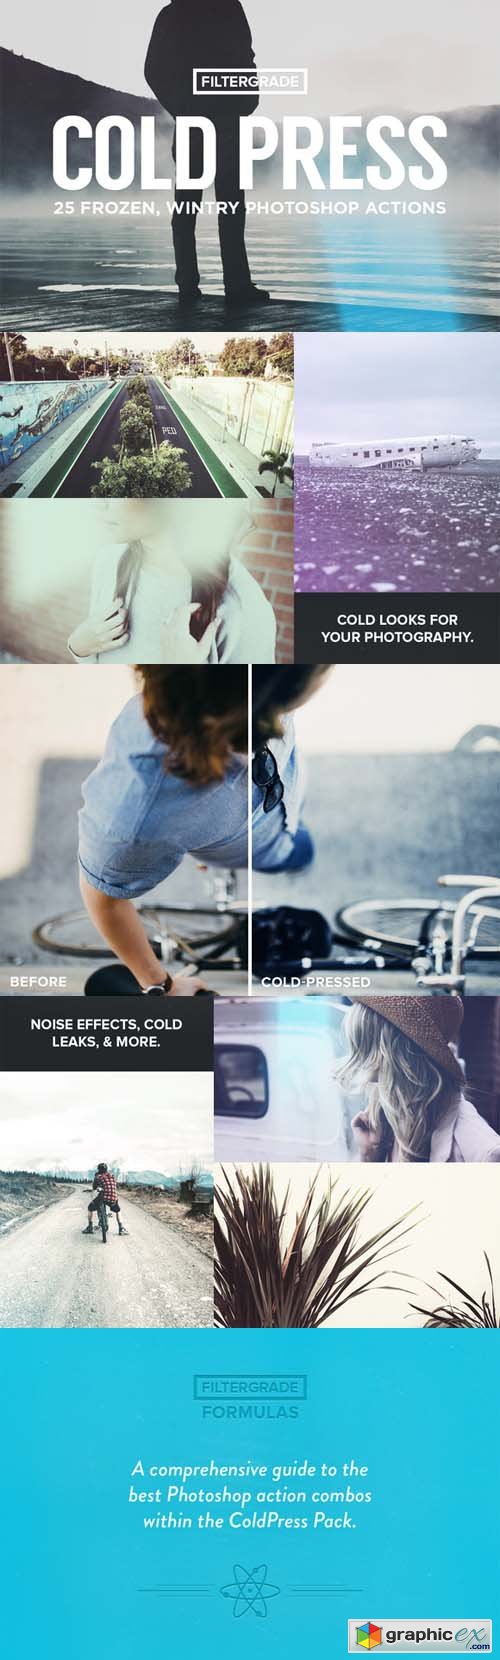 ColdPress - Winter Photoshop Actions